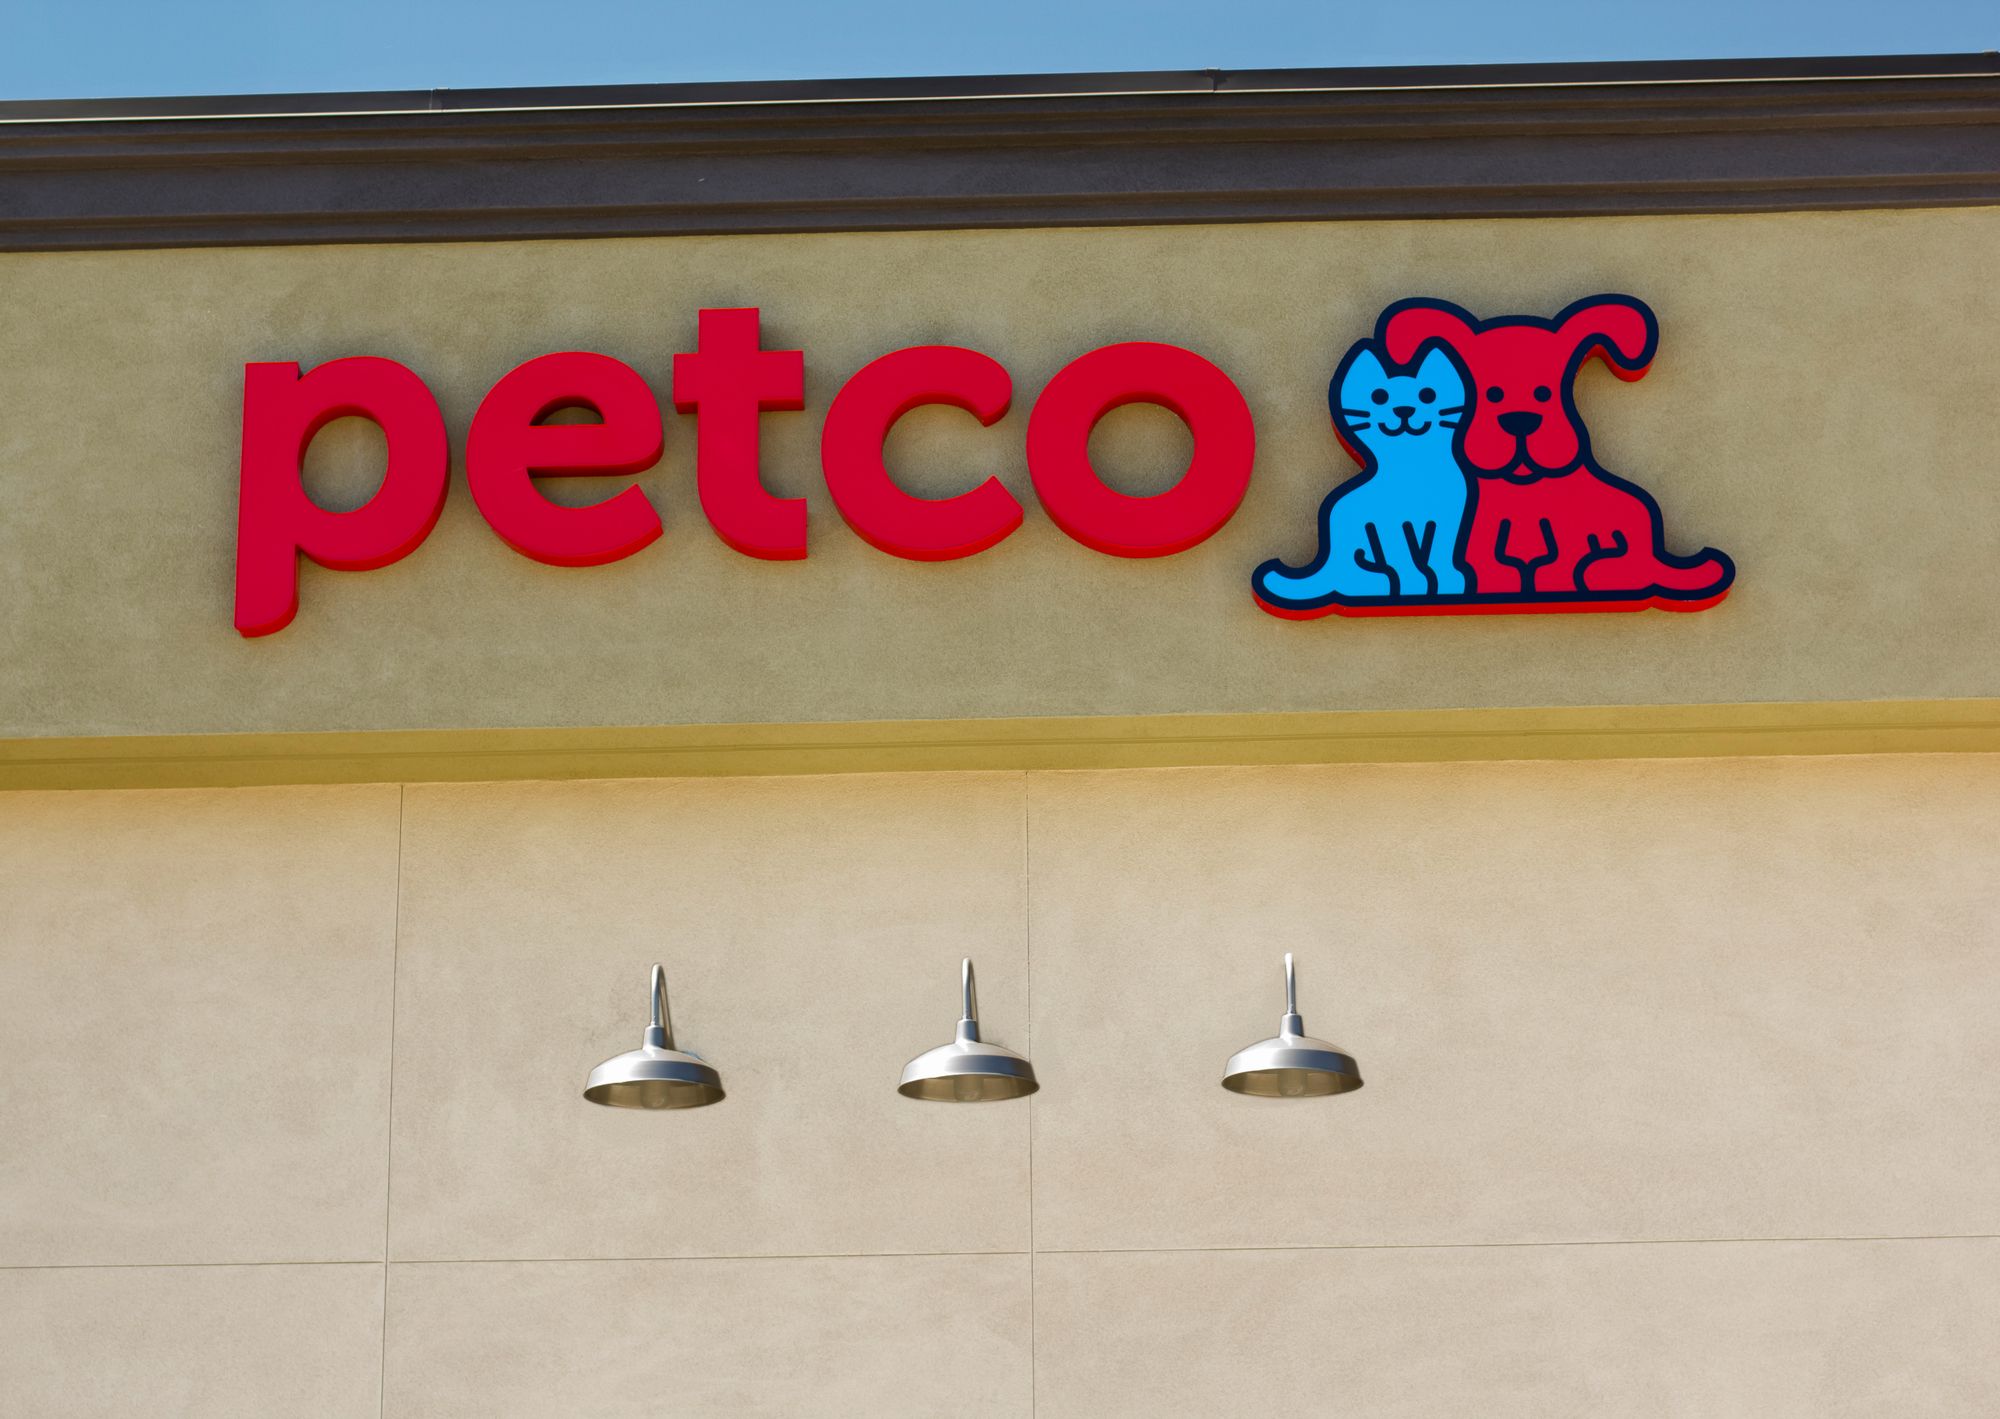 PETCO Class Action Alleges California's Privacy Protection Law Violated